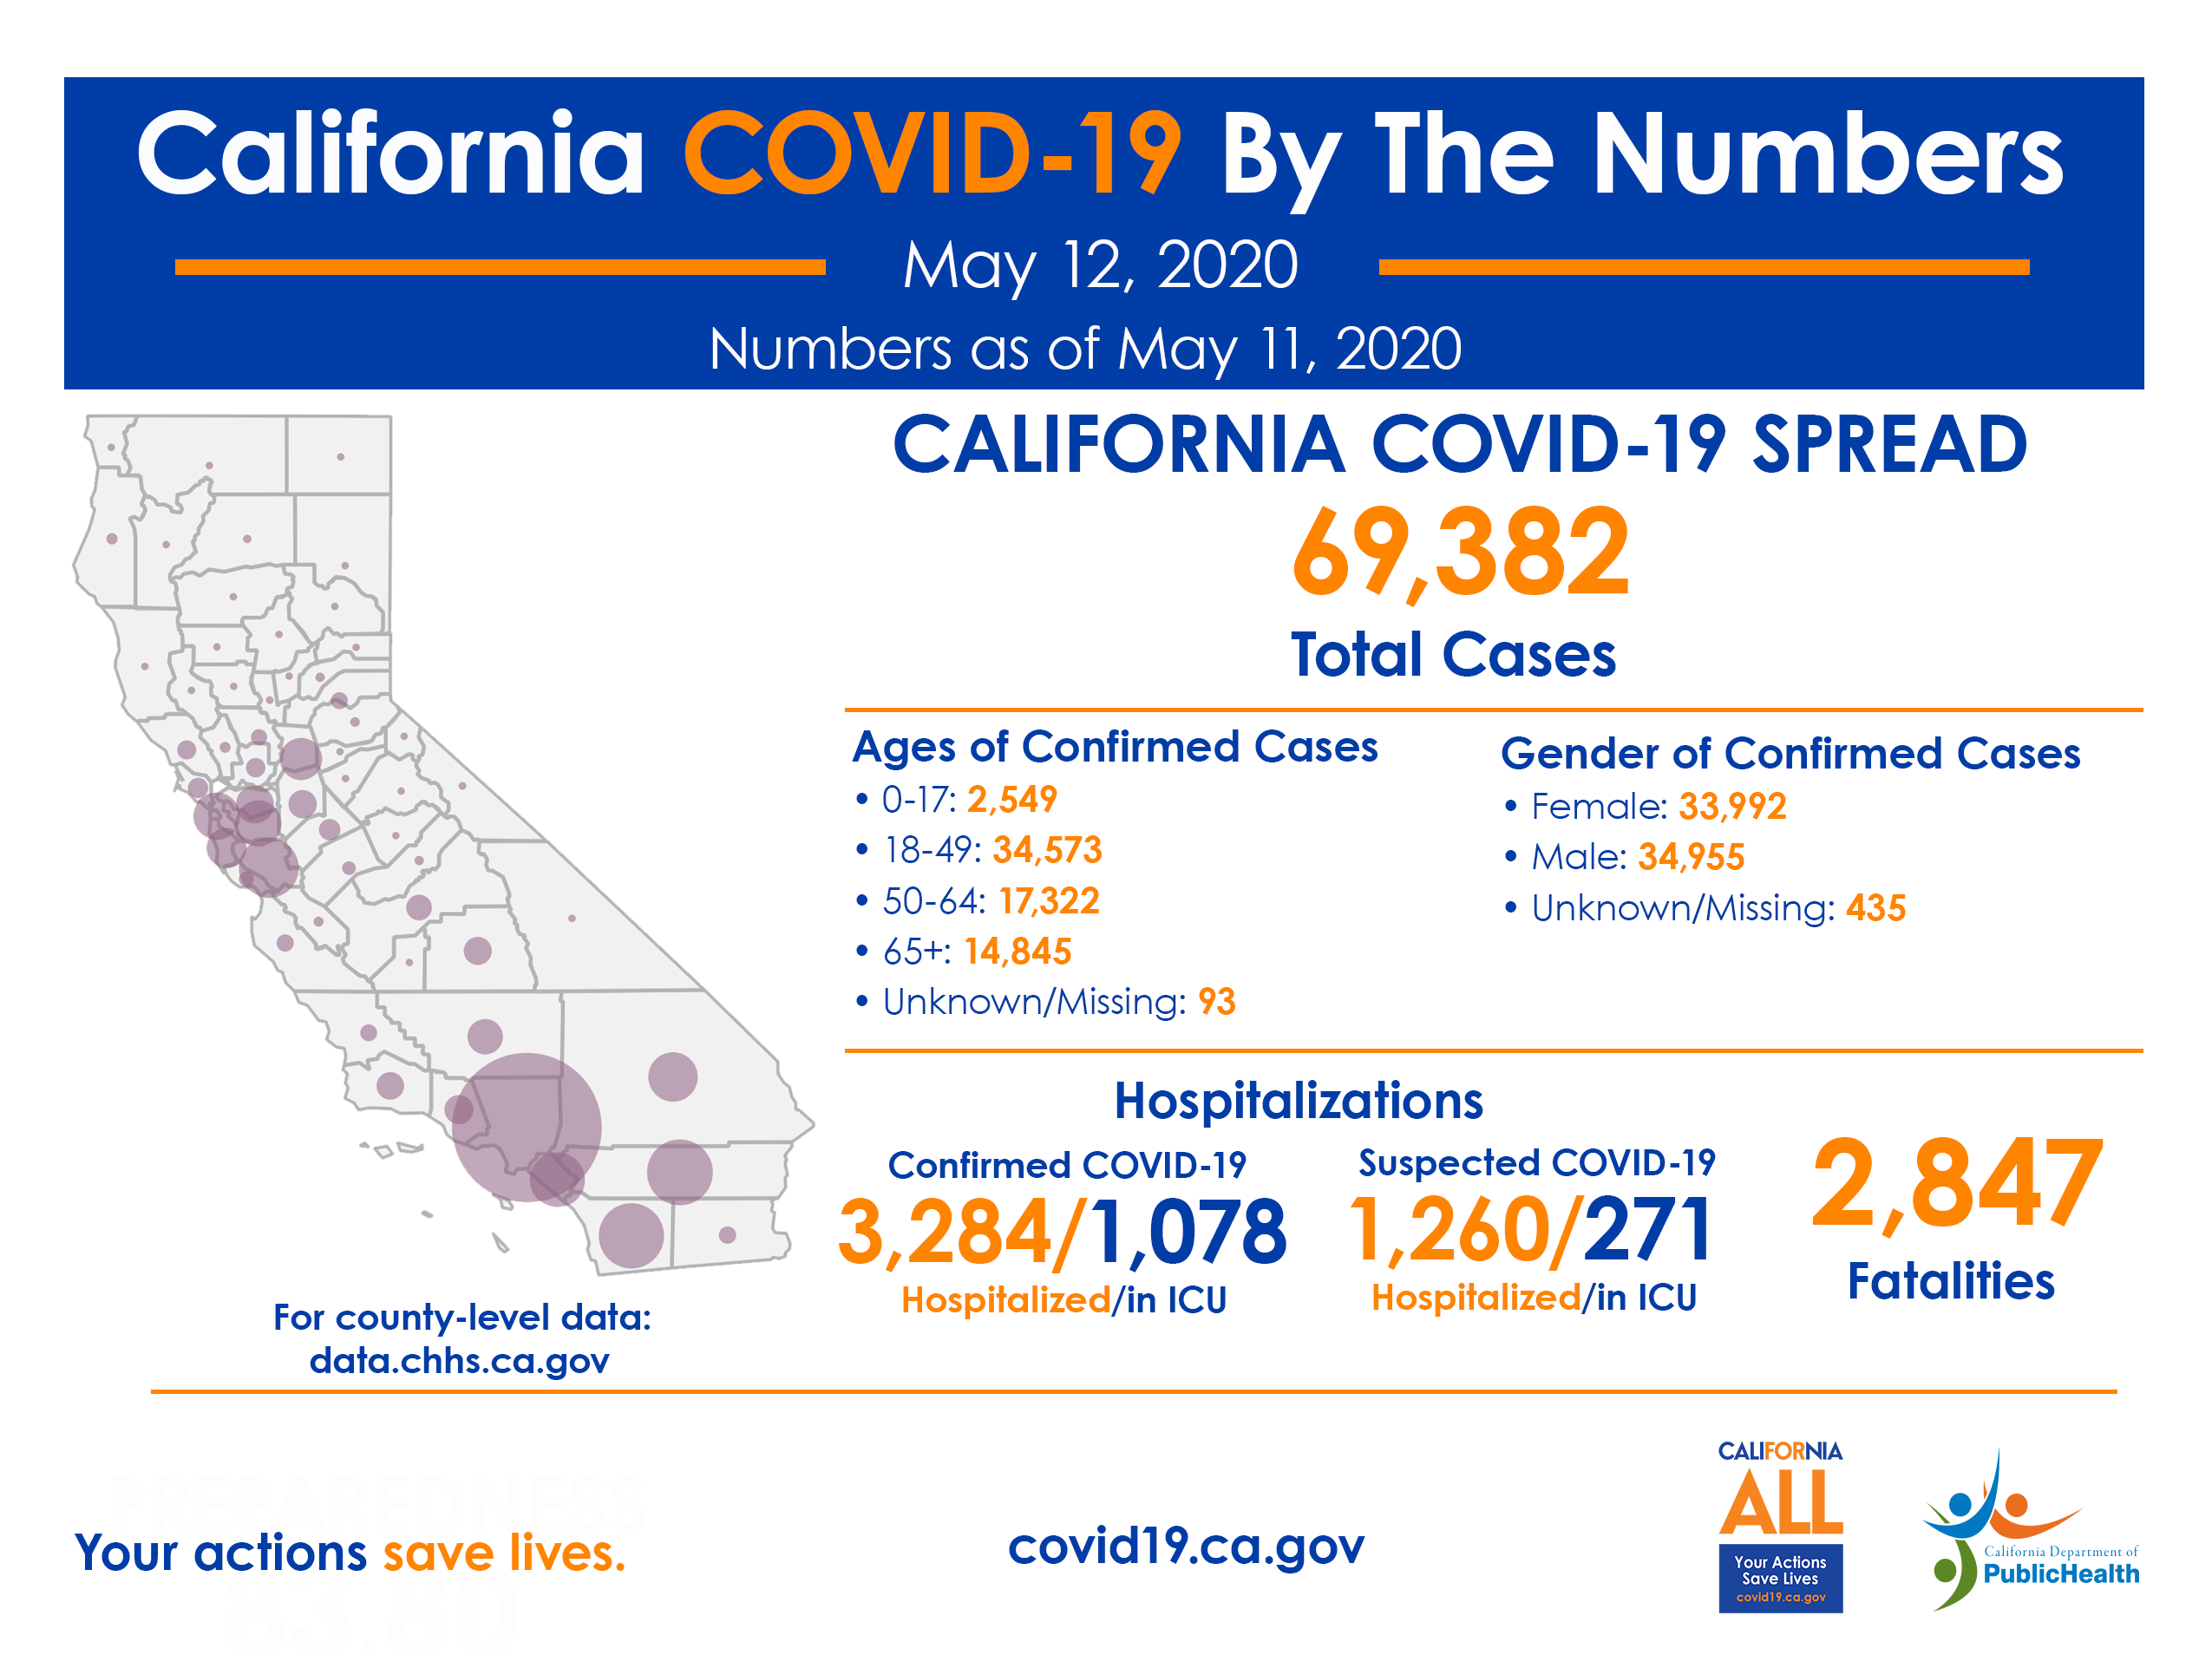 California COVID-19 by the Numbers as of May 11, 2020